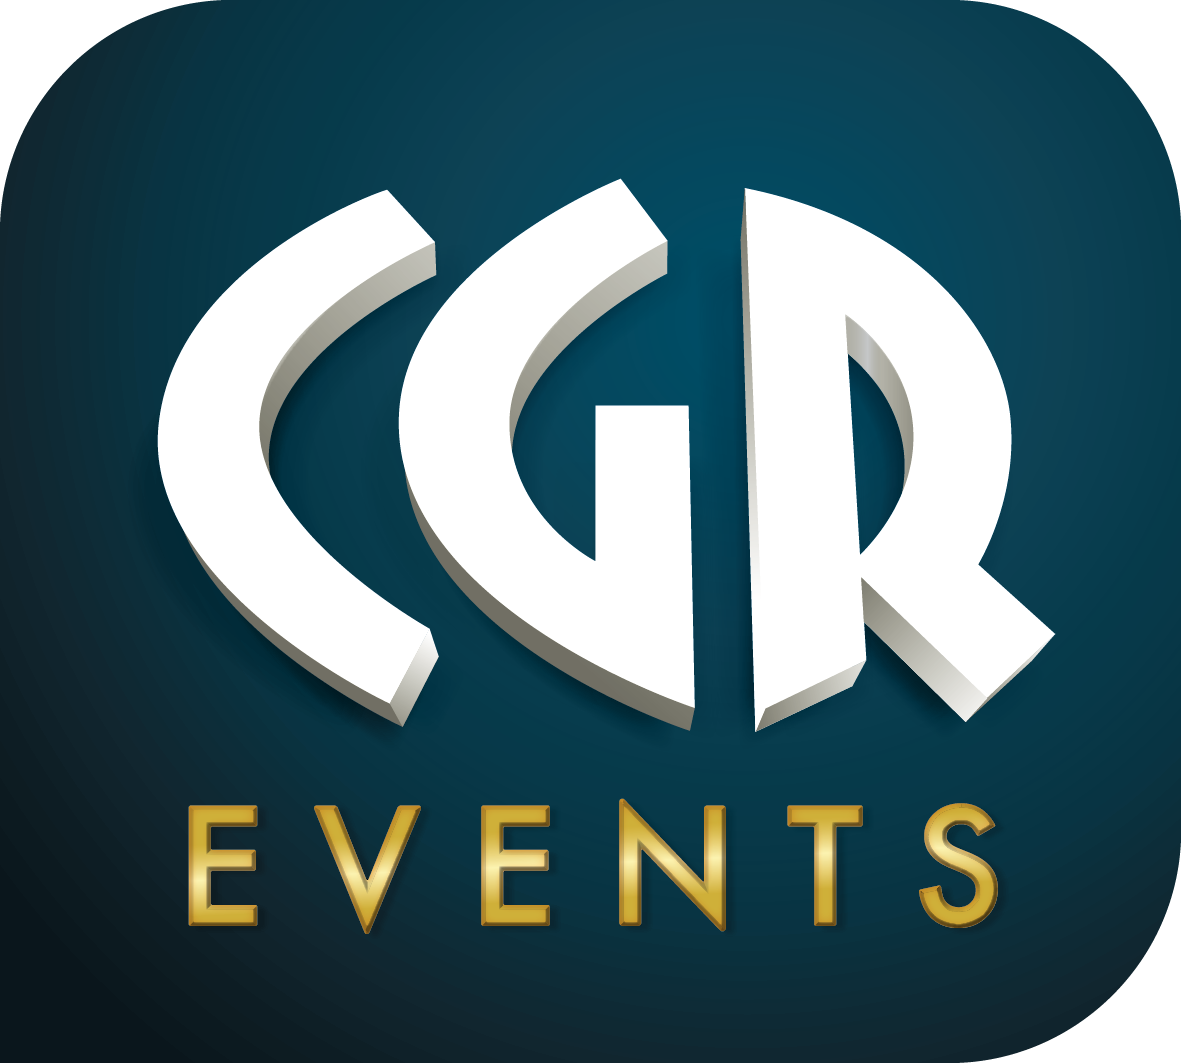 CGR Chateauroux